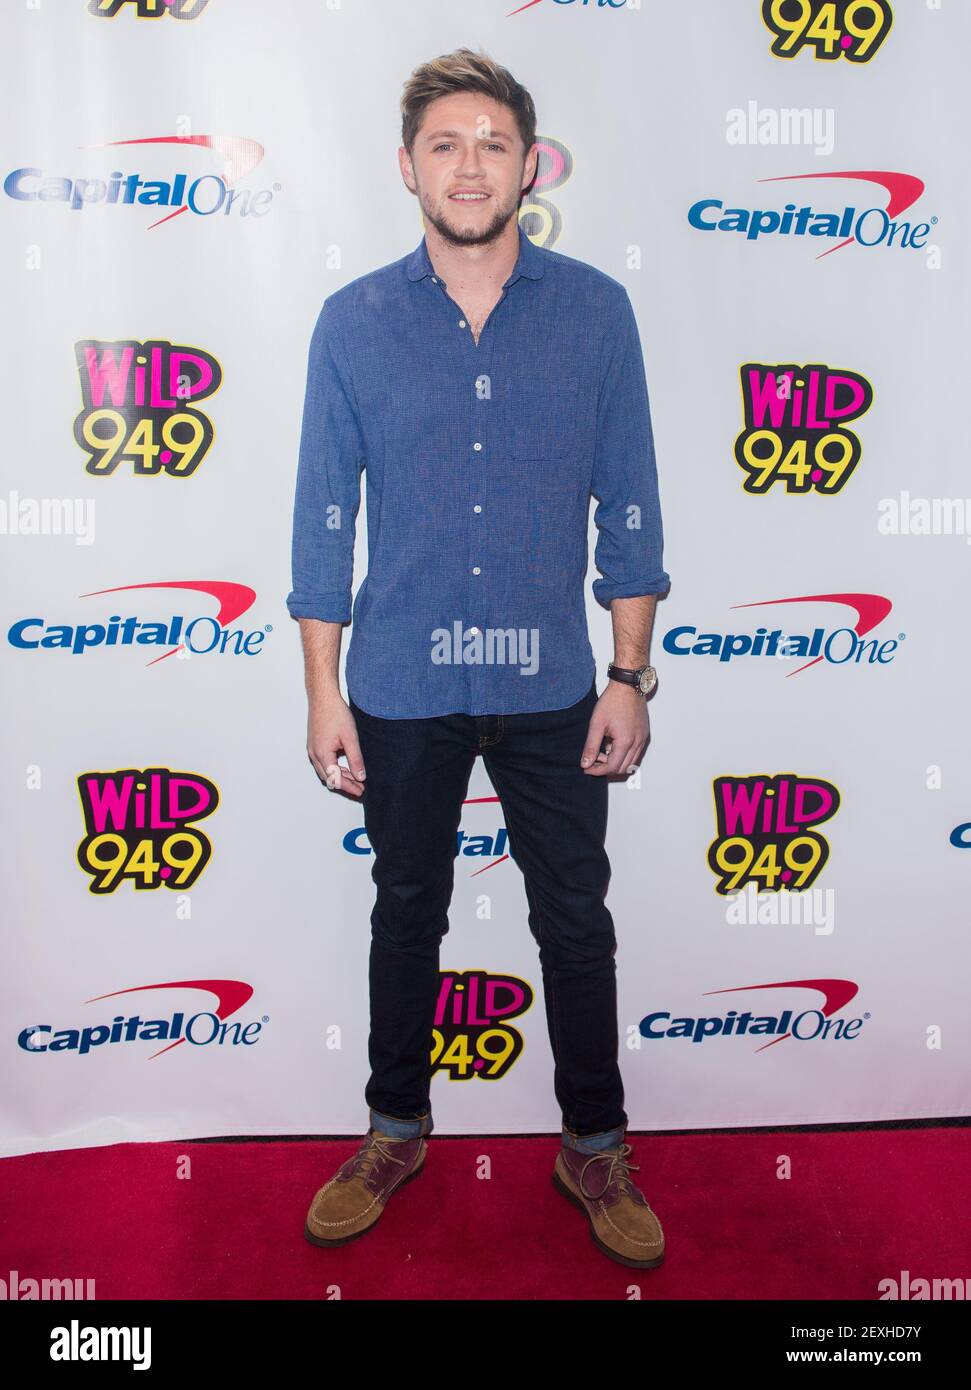 Recording artist Niall Horan poses in the press room during the WiLD 94.9 iHeartRadio Jingle Ball at SAP Center on December 1, 2016 in San Jose, California(Photo by Chris Tuite/ImageSPACE) *** Please Use Credit from Credit Field *** Stock Photo